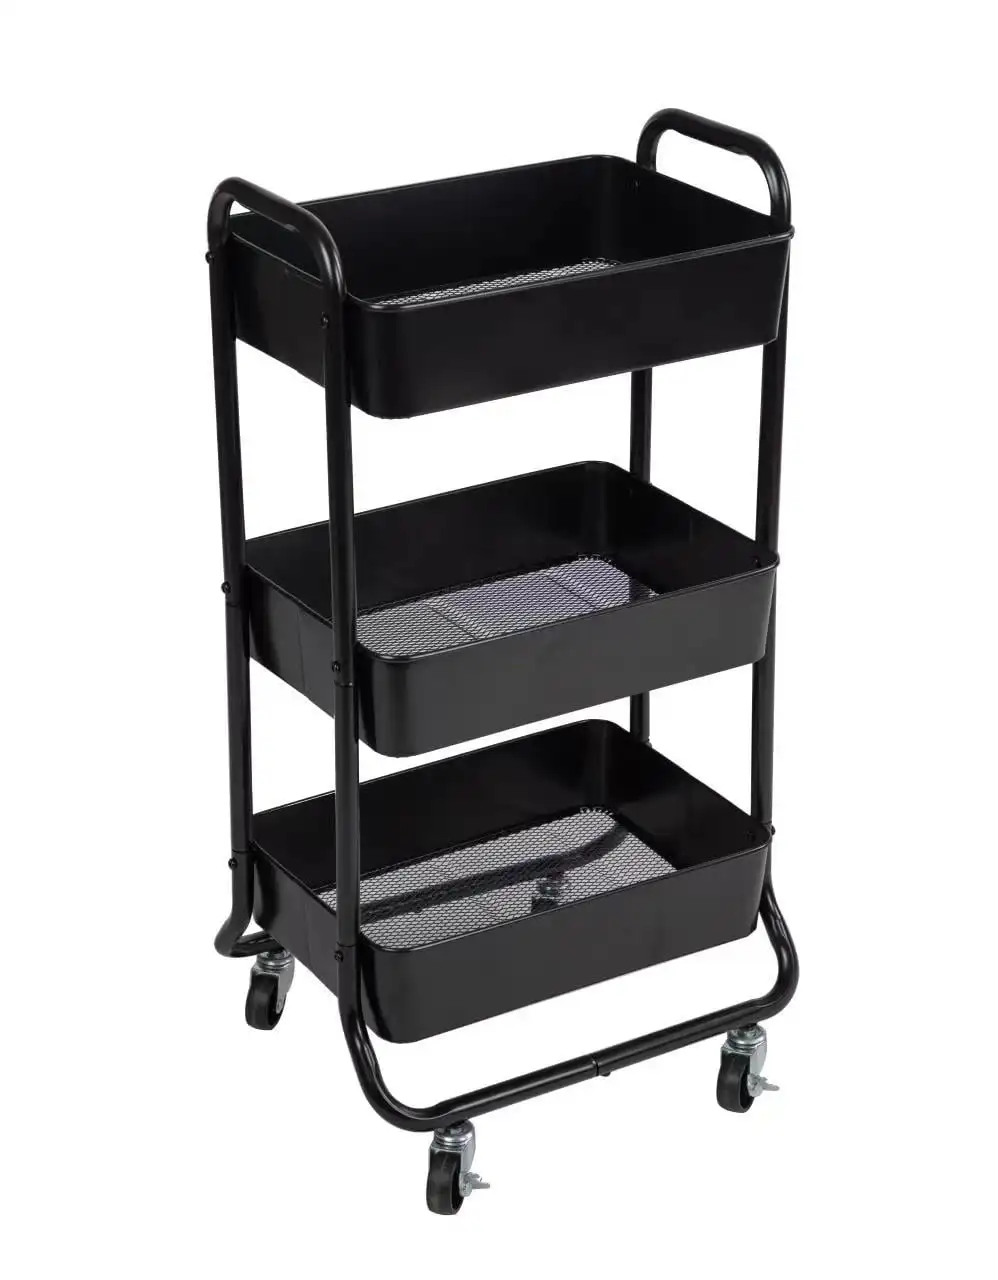 

Mainstays 3 Tier Metal Utility Cart Rich Black, Laundry Baskets, Powder Coating, Adult and Child